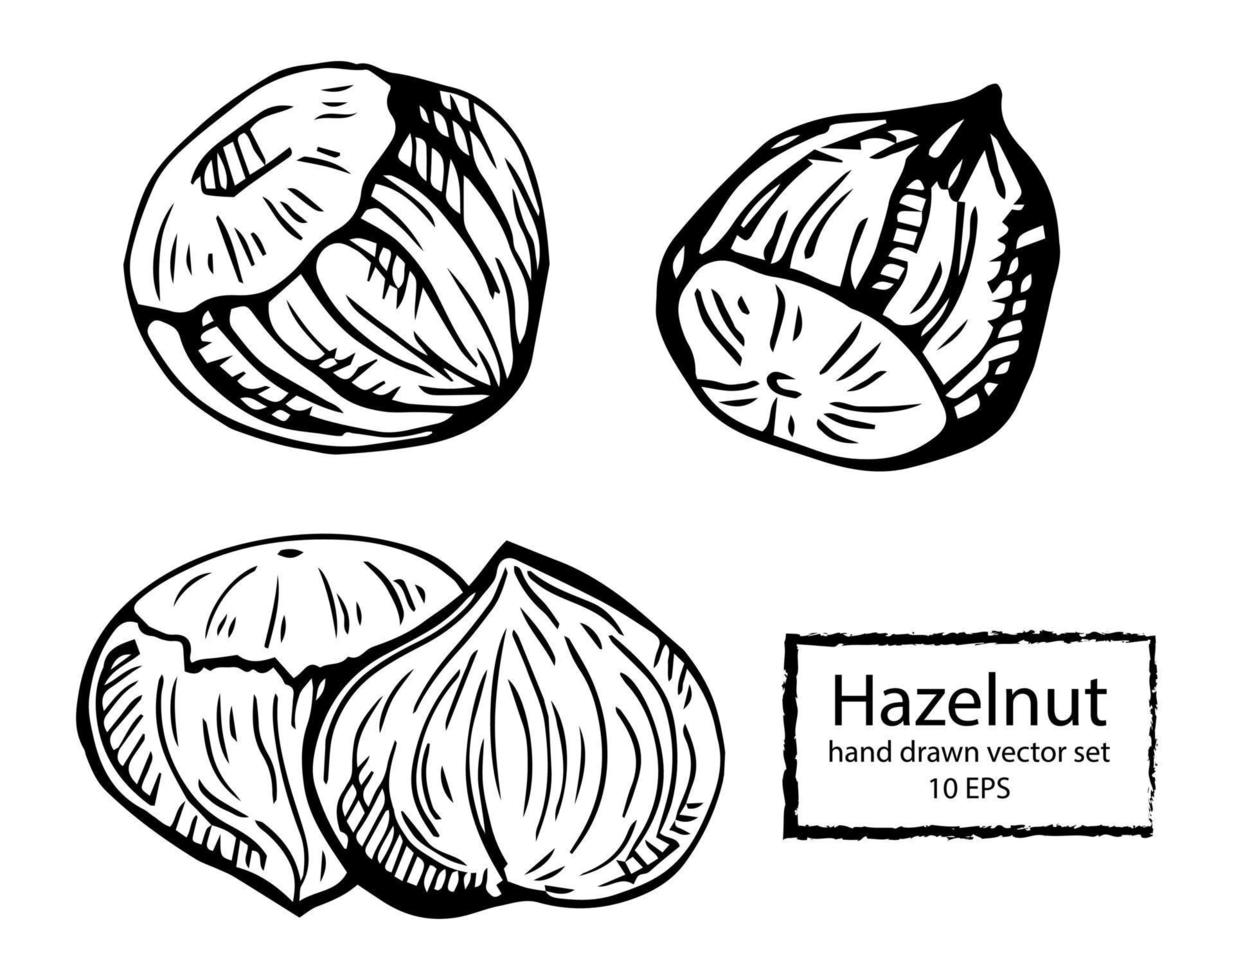 Hazel nut set. Isolated flat hazelnut in shell and peeled with leaves sketch icons. Natural healthy hazel nut organic food collection. Vegetarian diet snack vector illustration